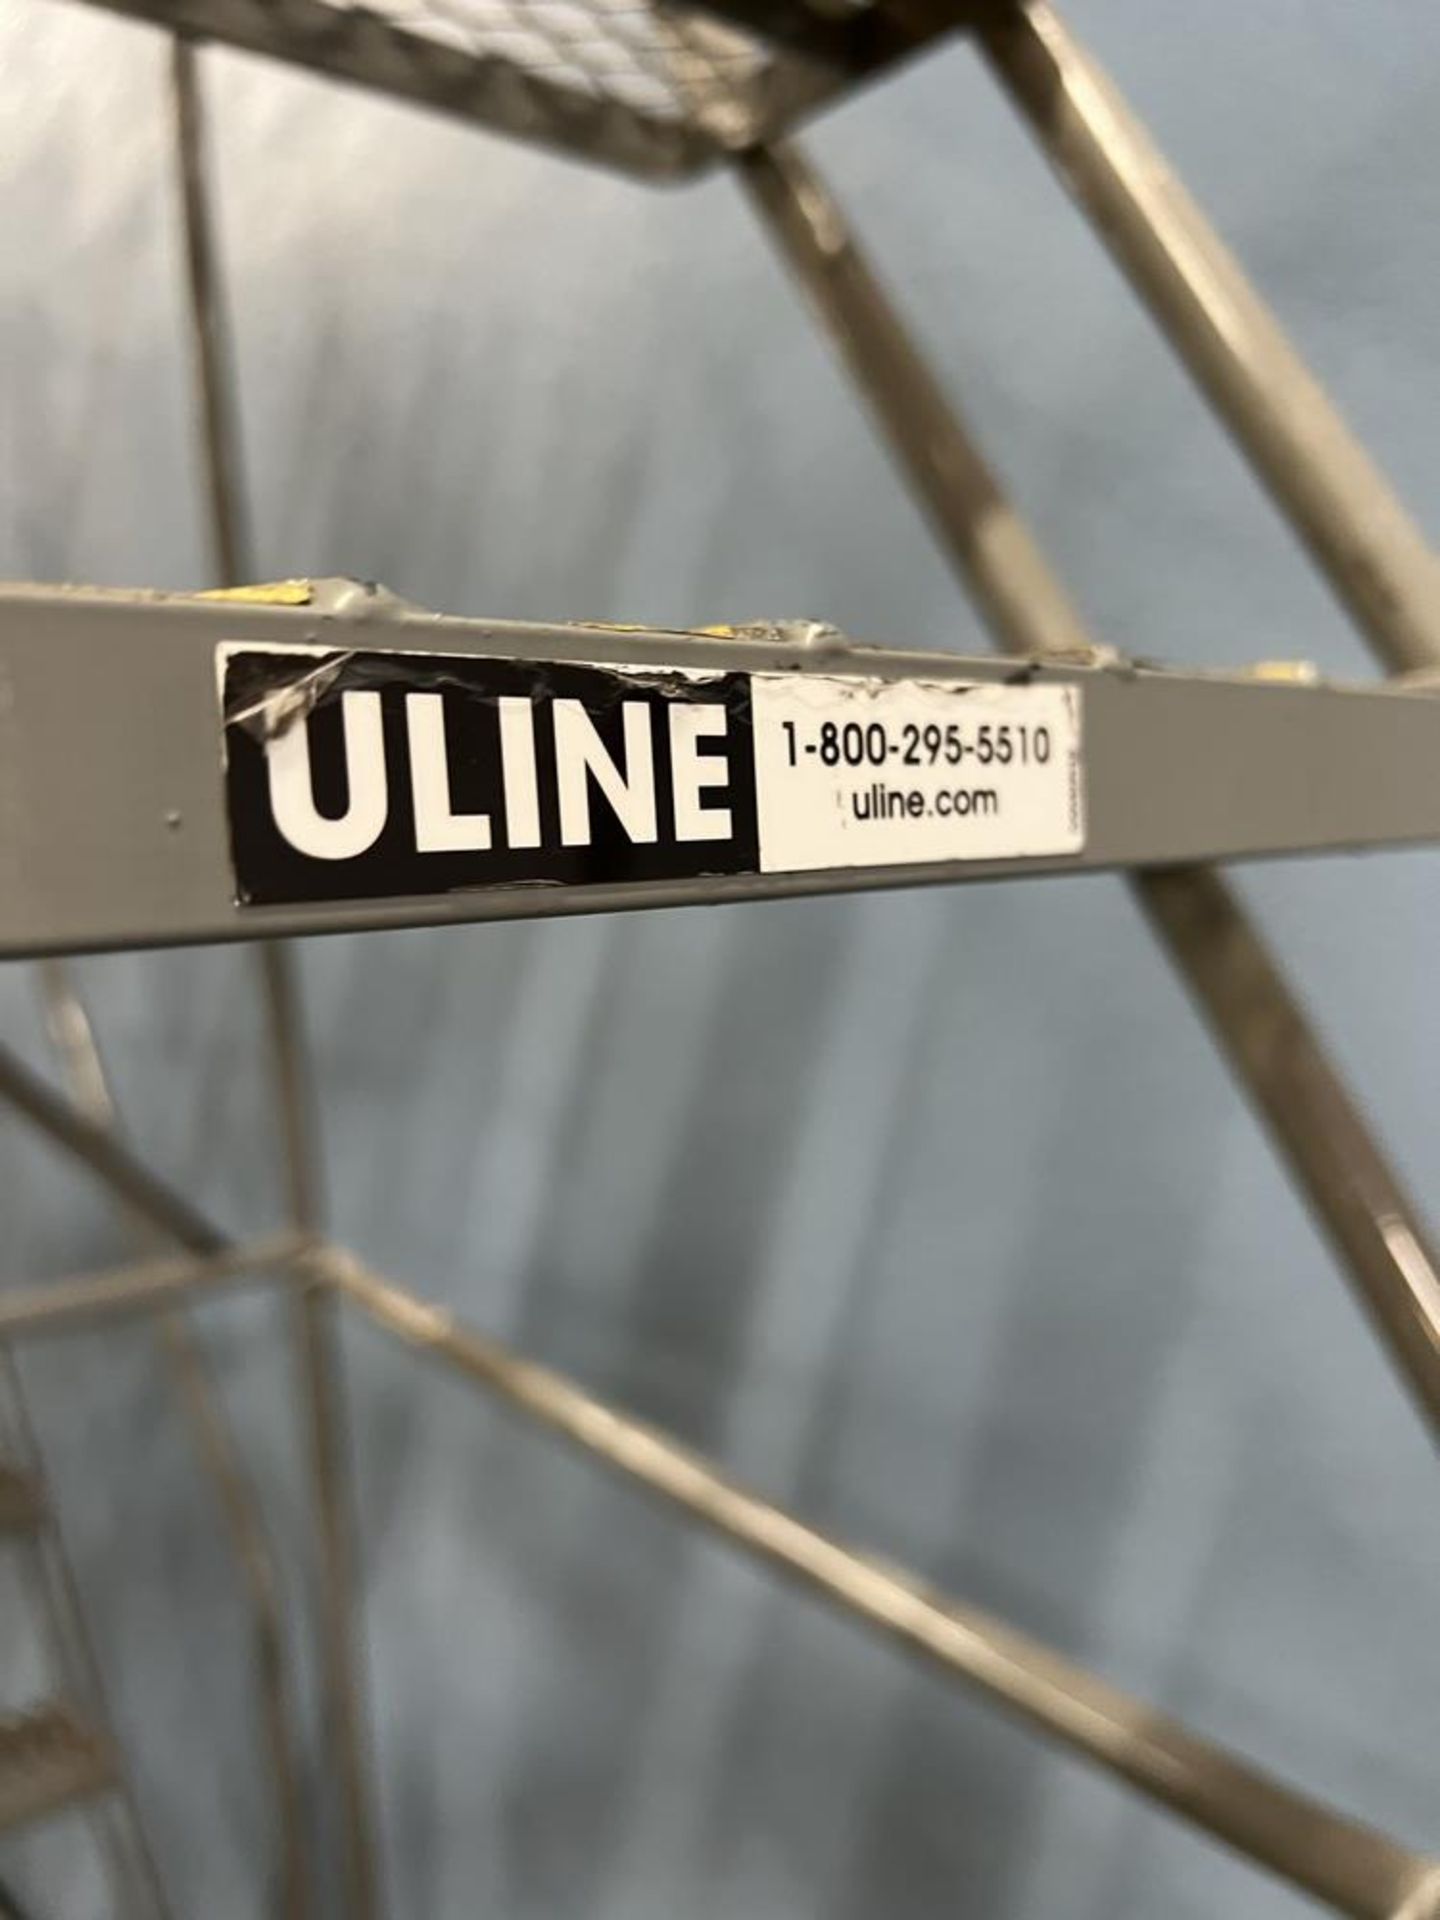 Uline Rolling Shop Step Ladder, 450 lb Capacity, Max Height 142", Top Step at 100" - Image 3 of 5